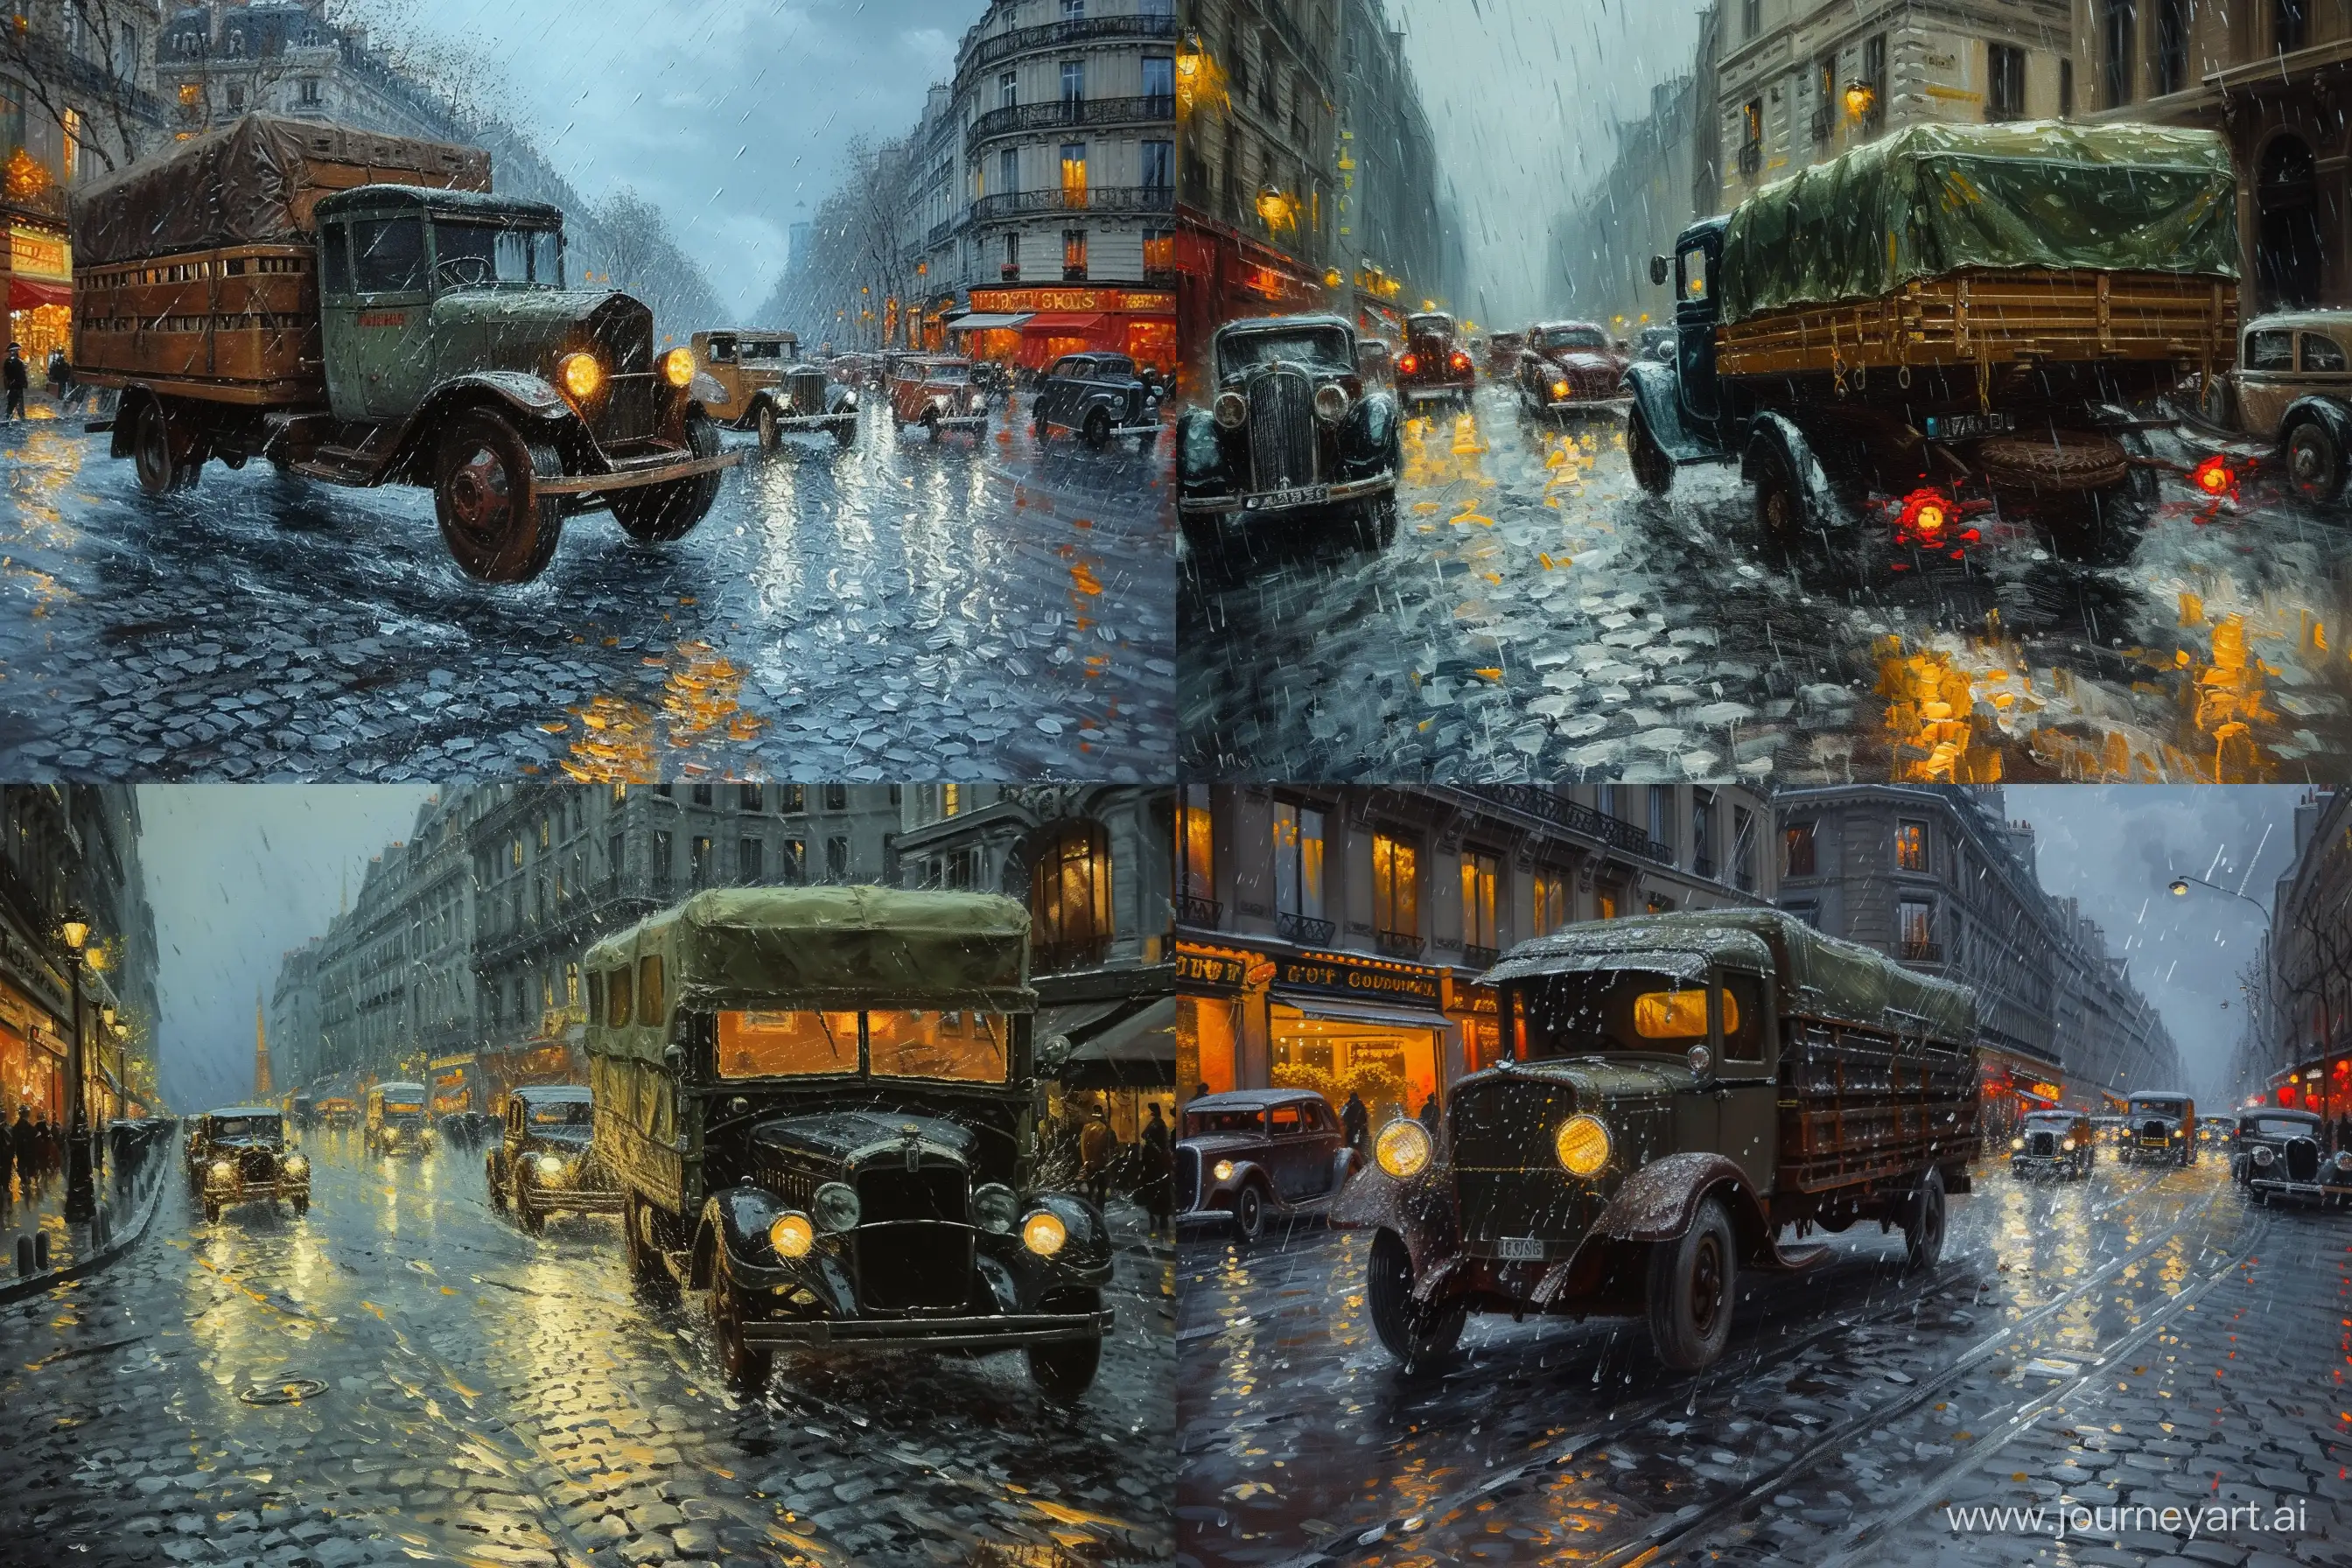 Vintage-Parisian-Street-Scene-1930s-Rainy-Night-with-Old-Truck-and-Classic-Cars